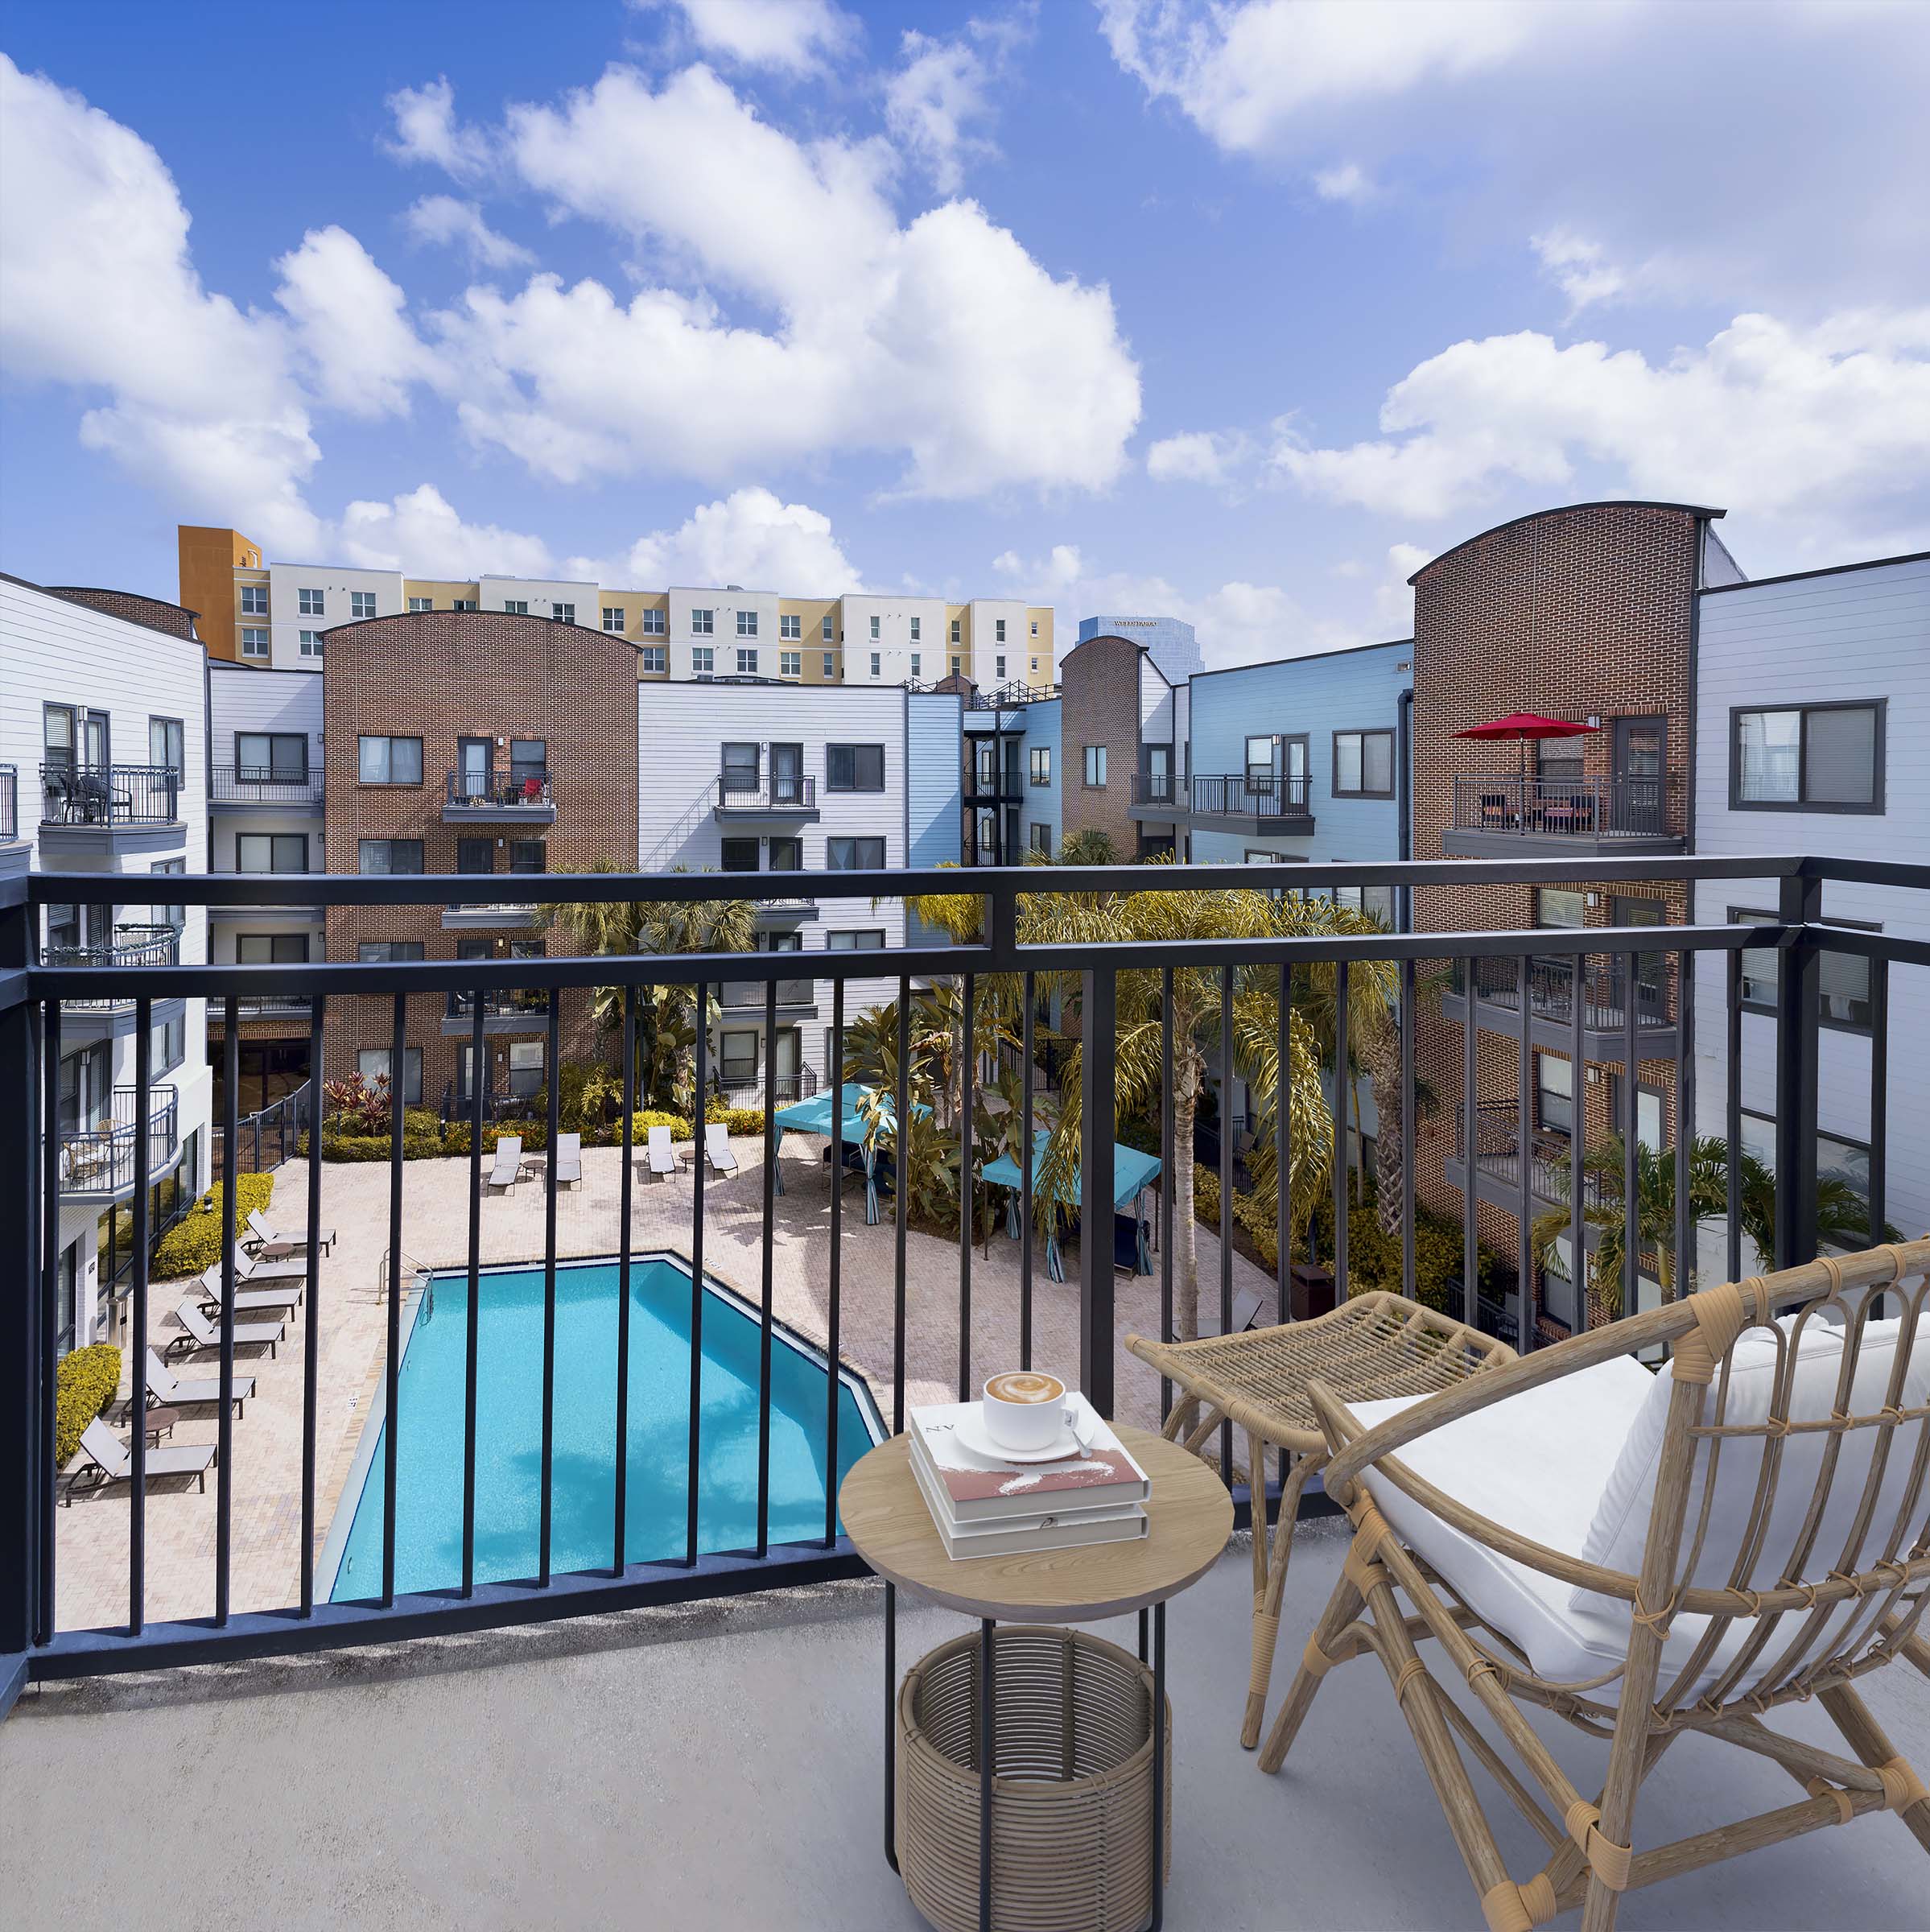 Private apartment balcony overlooking pool at Camden Orange Court apartments in Orlando, FL